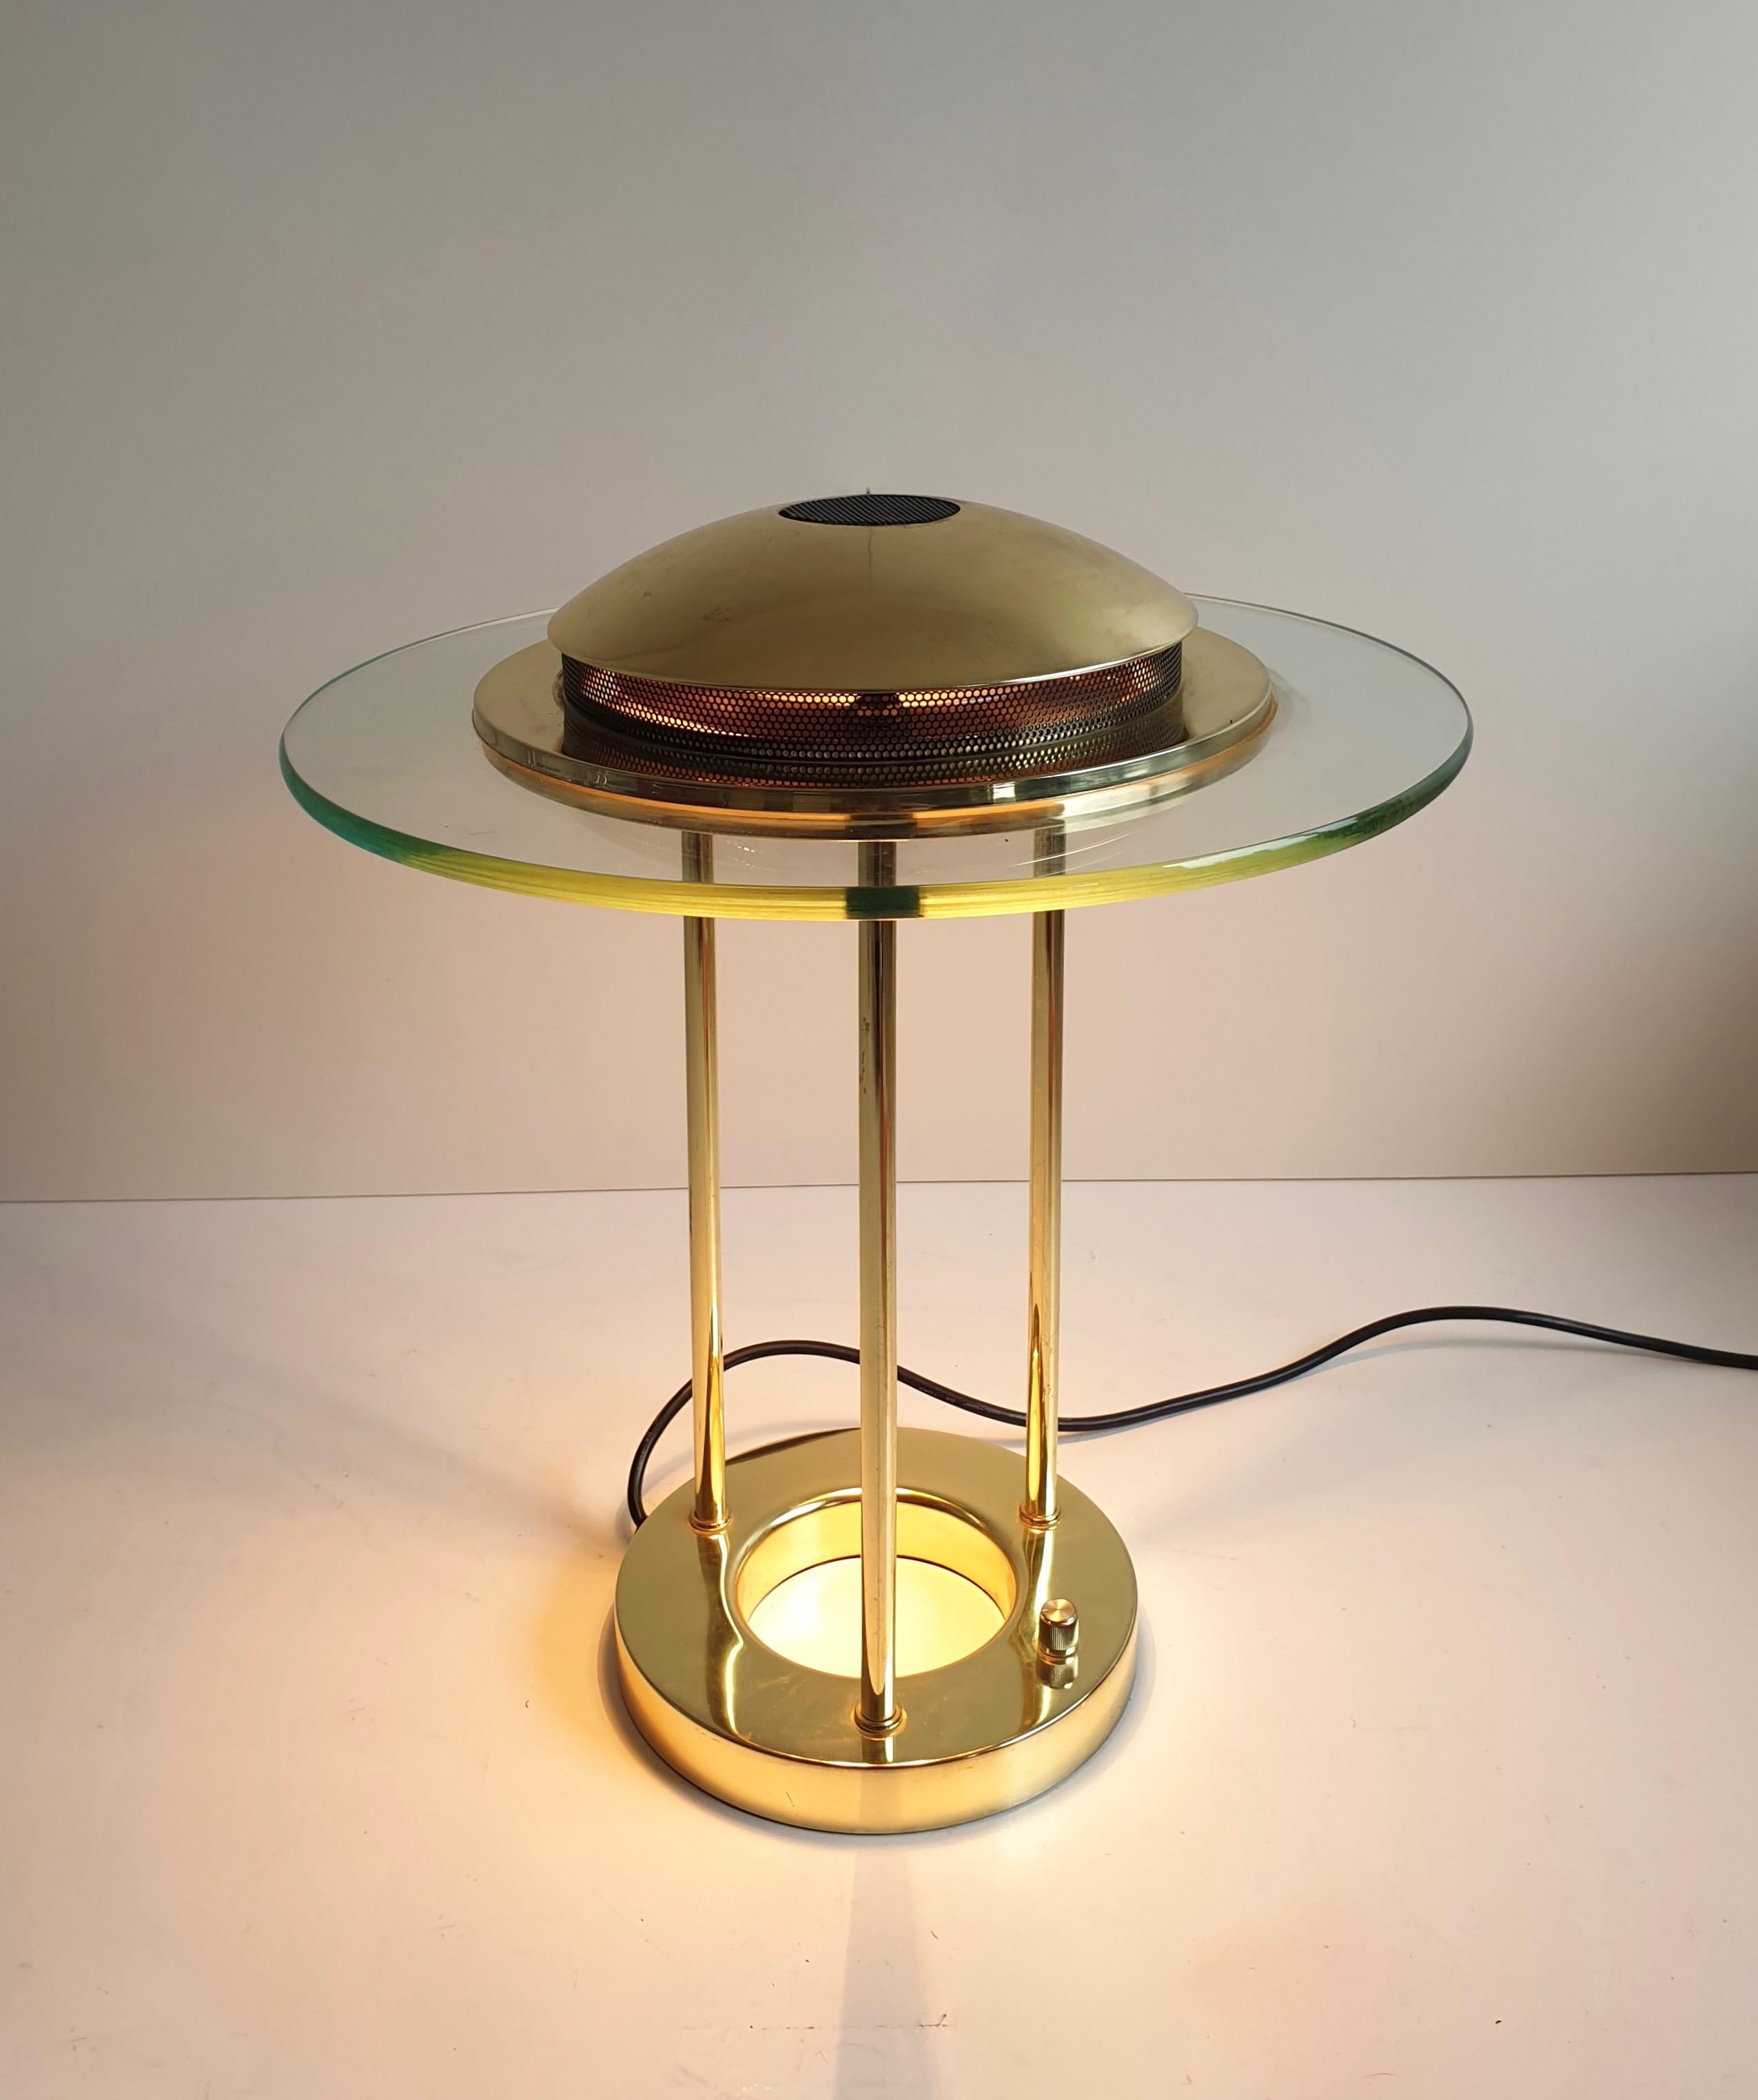 North American Vintage Brass 'Saturn' Desk Lamp by R. Sonneman for George Kovacs, circa 1980 For Sale